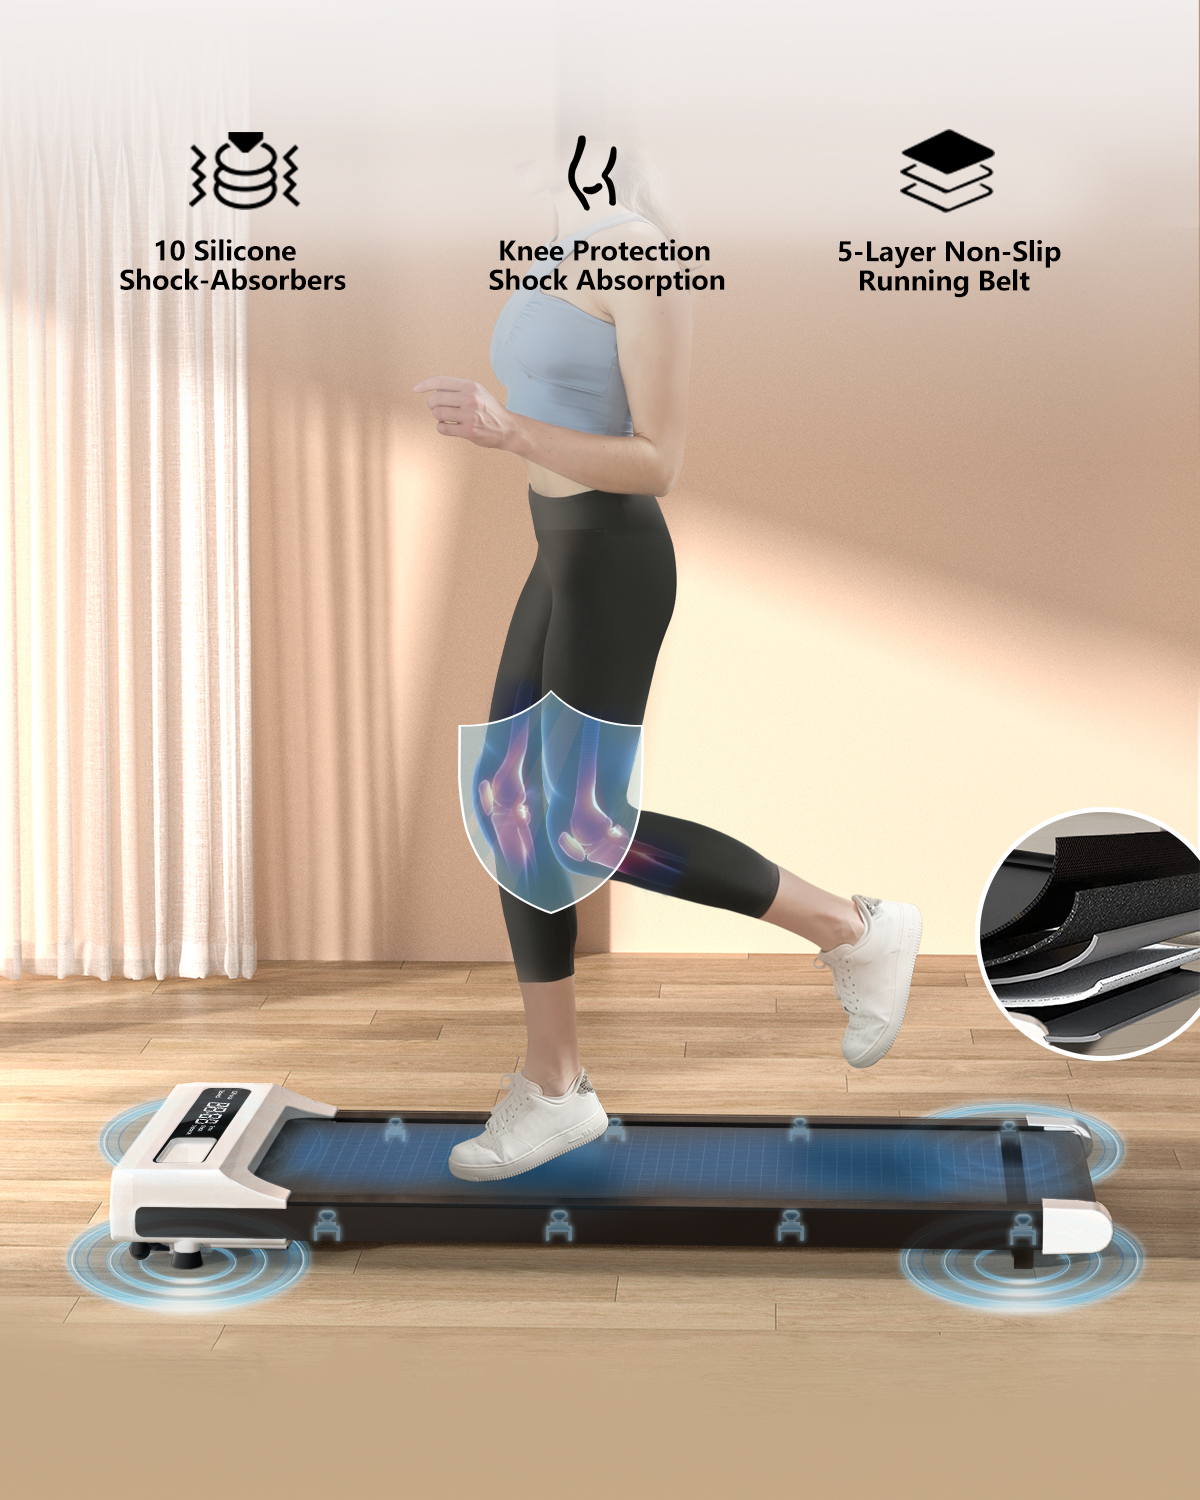 JURITS Walking Pad 2 in 1 for Walking and Jogging, Under Desk Treadmill for Home Office with Remote Control, Portable Walking Pad Treadmill Under Desk, Desk Treadmill in LED Display,White - image 3 of 6